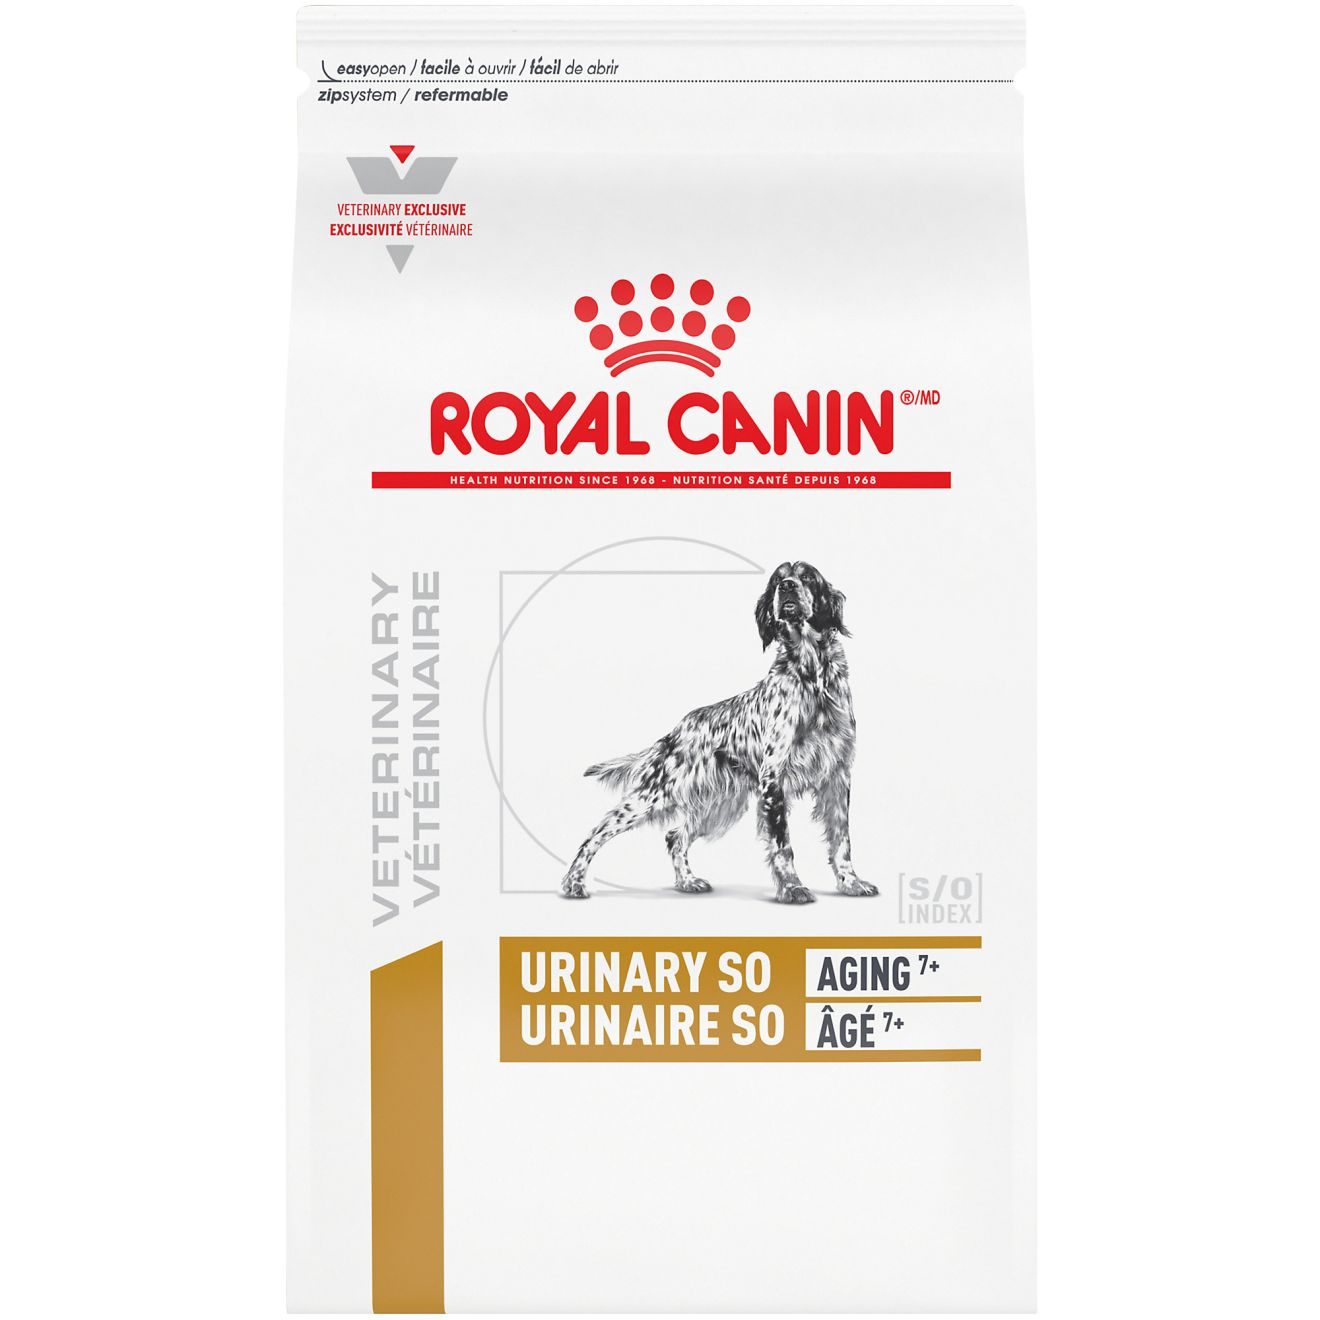 Canine Urinary SO® Aging 7+